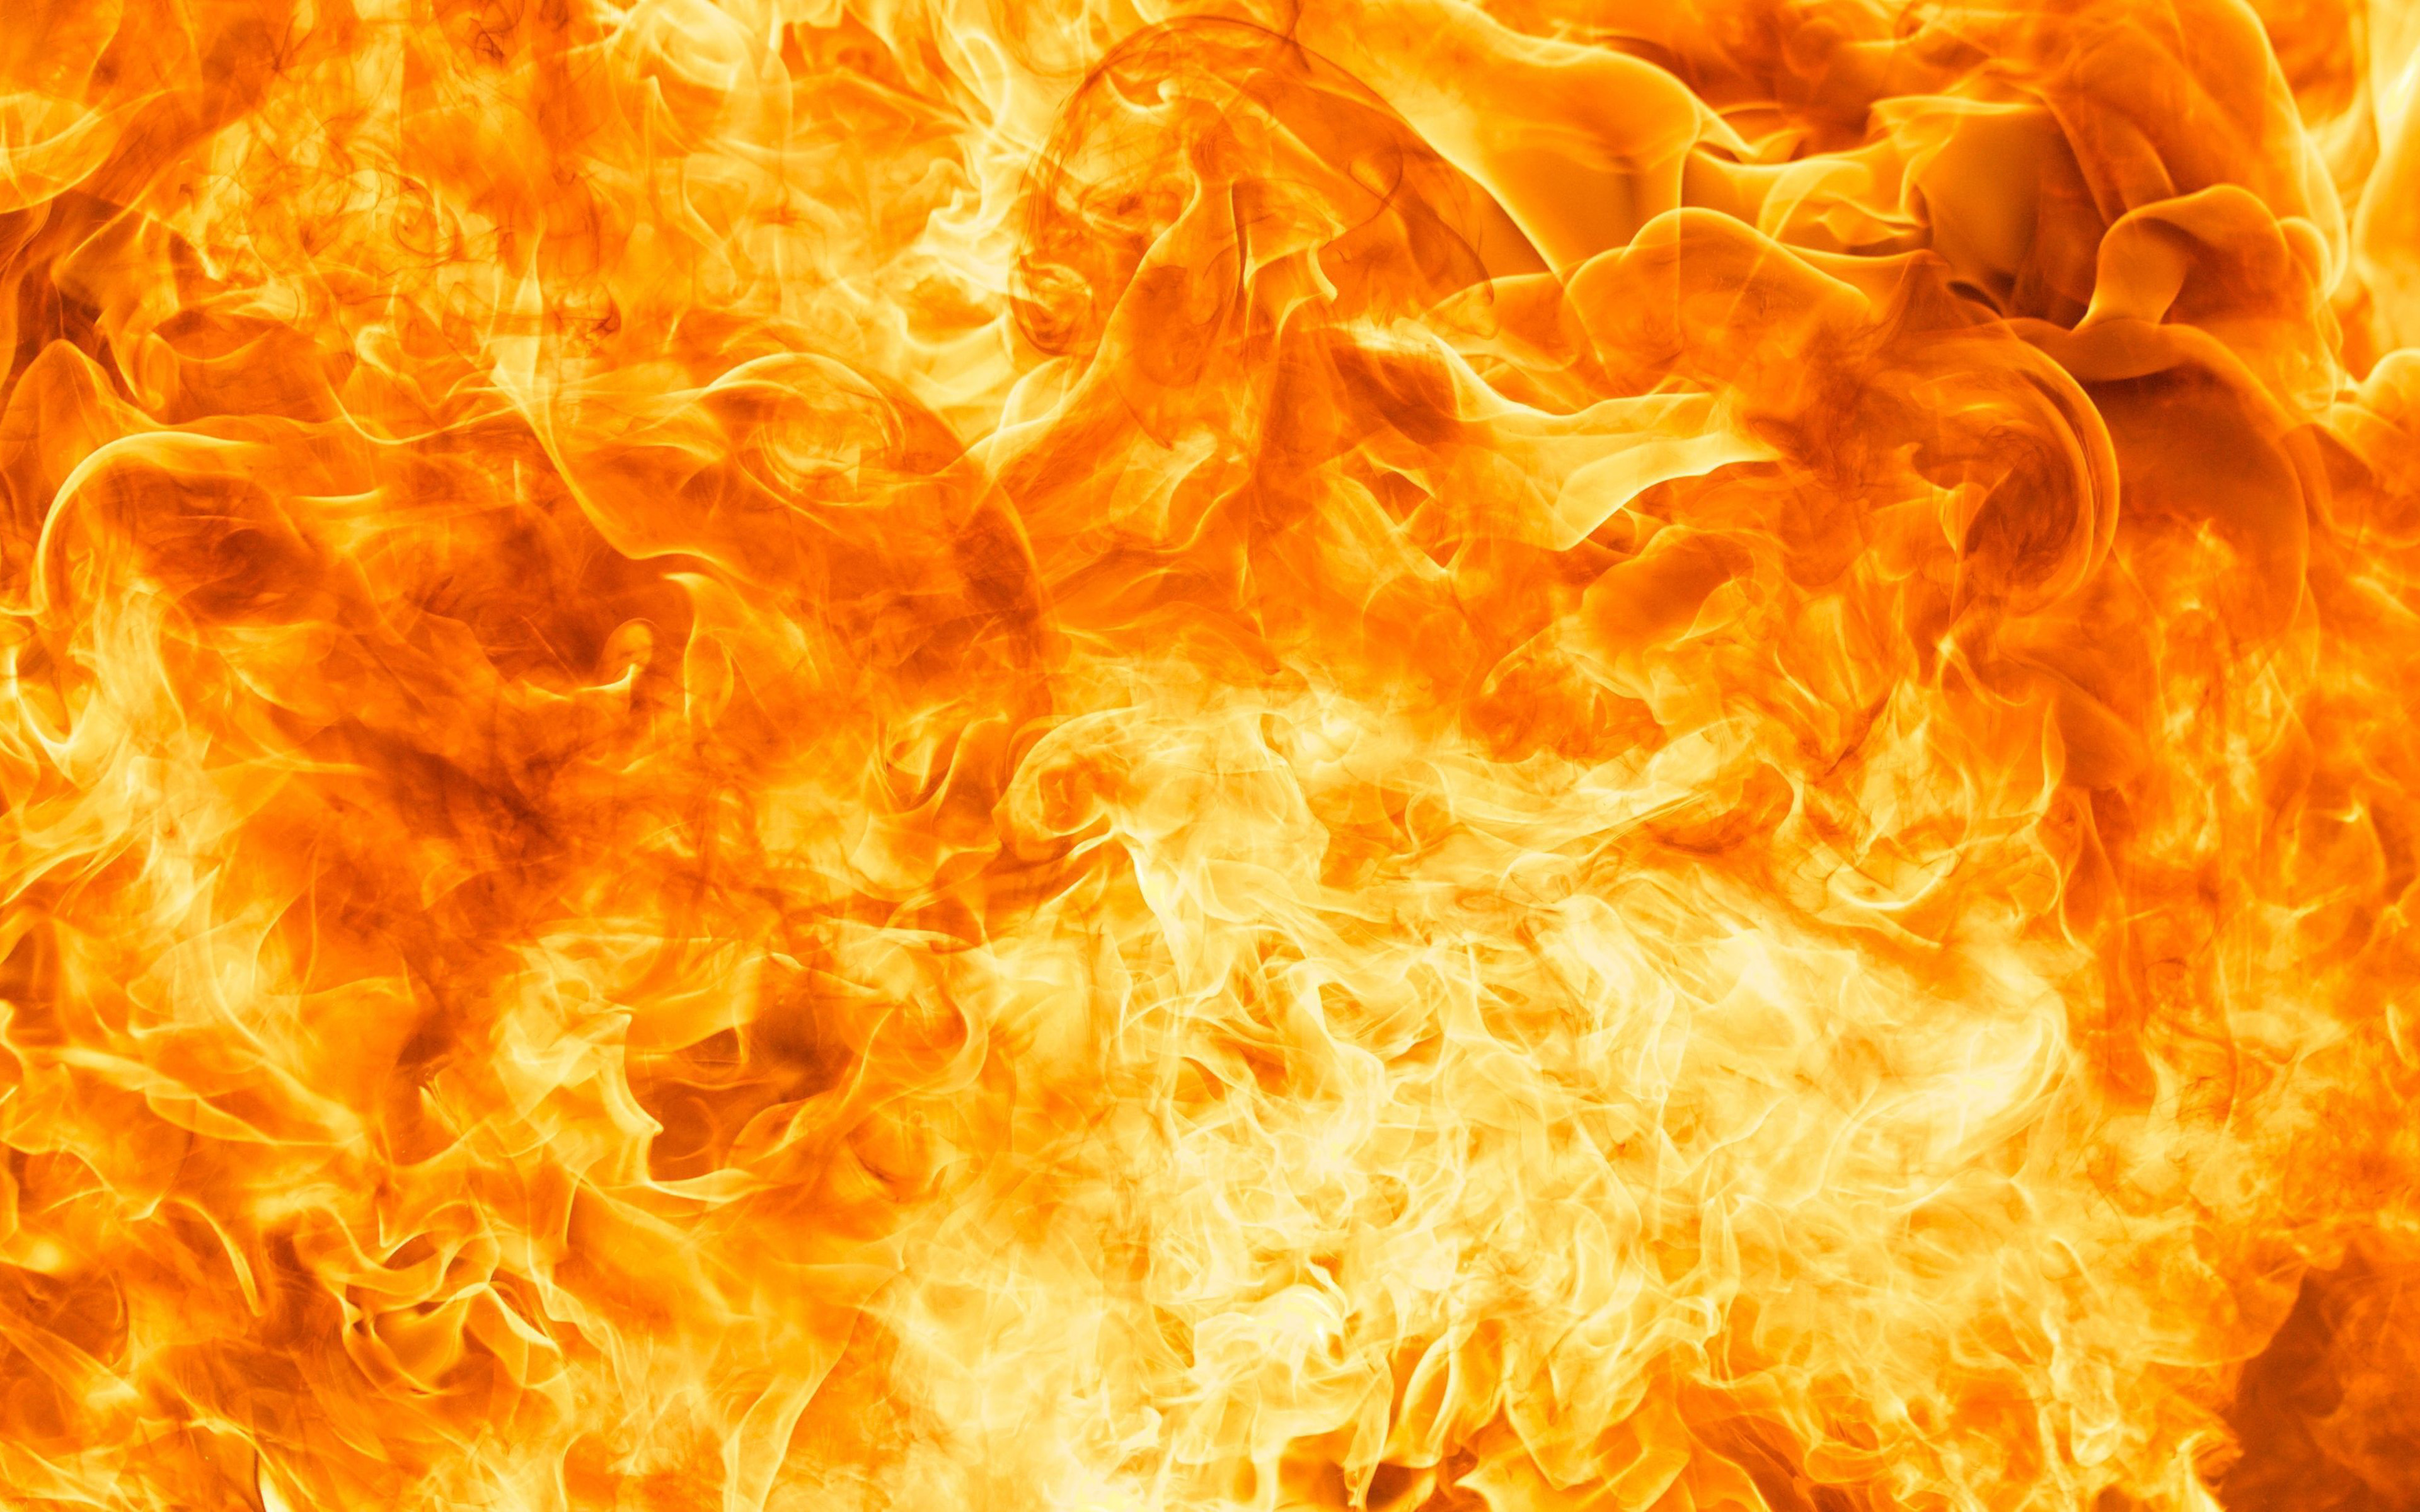 Download wallpaper orange fire background, 4k, fire textures, fire flames, fire, background with fire, flames patterns, orange fire flames for desktop with resolution 3840x2400. High Quality HD picture wallpaper